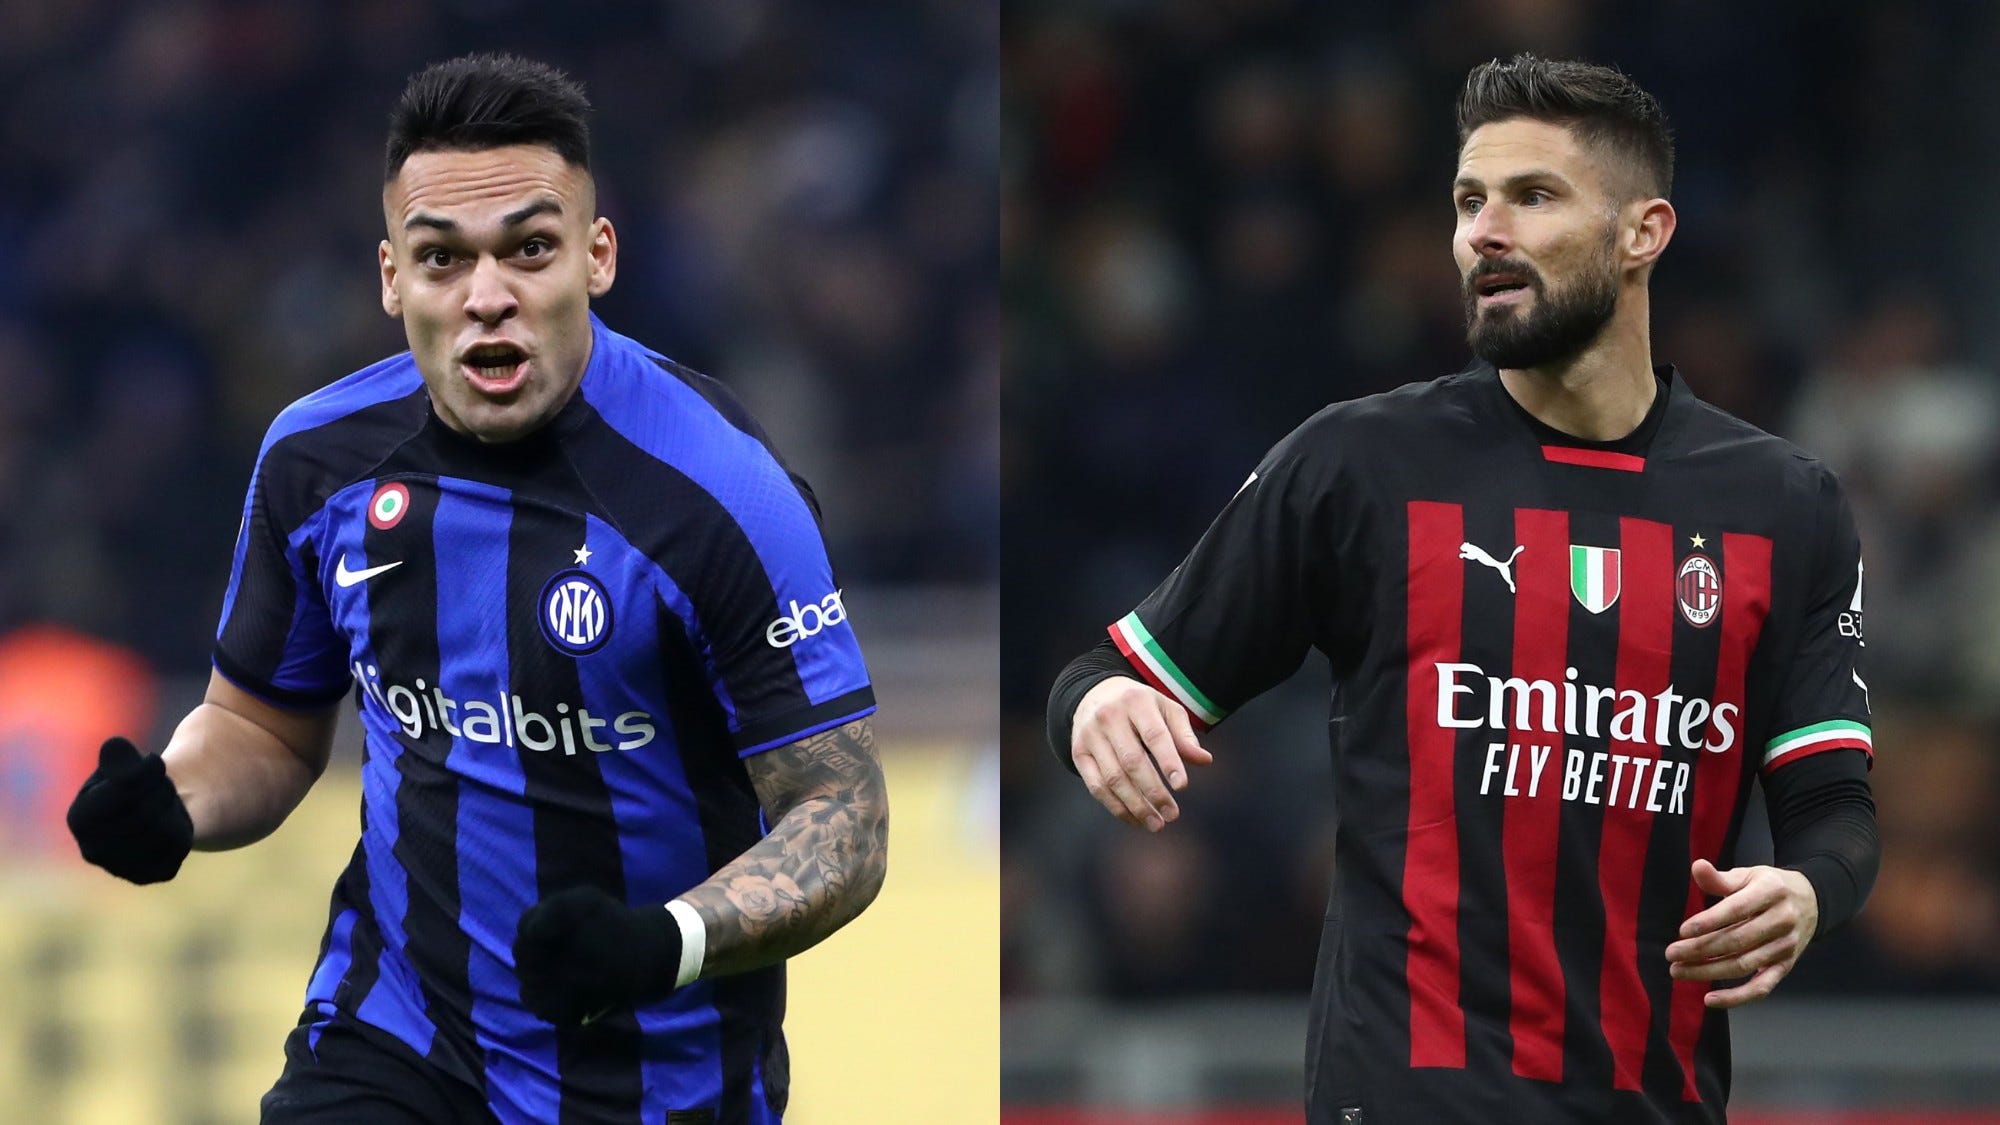 Inter vs AC Milan Live stream, TV channel, kick-off time and where to watch Goal India